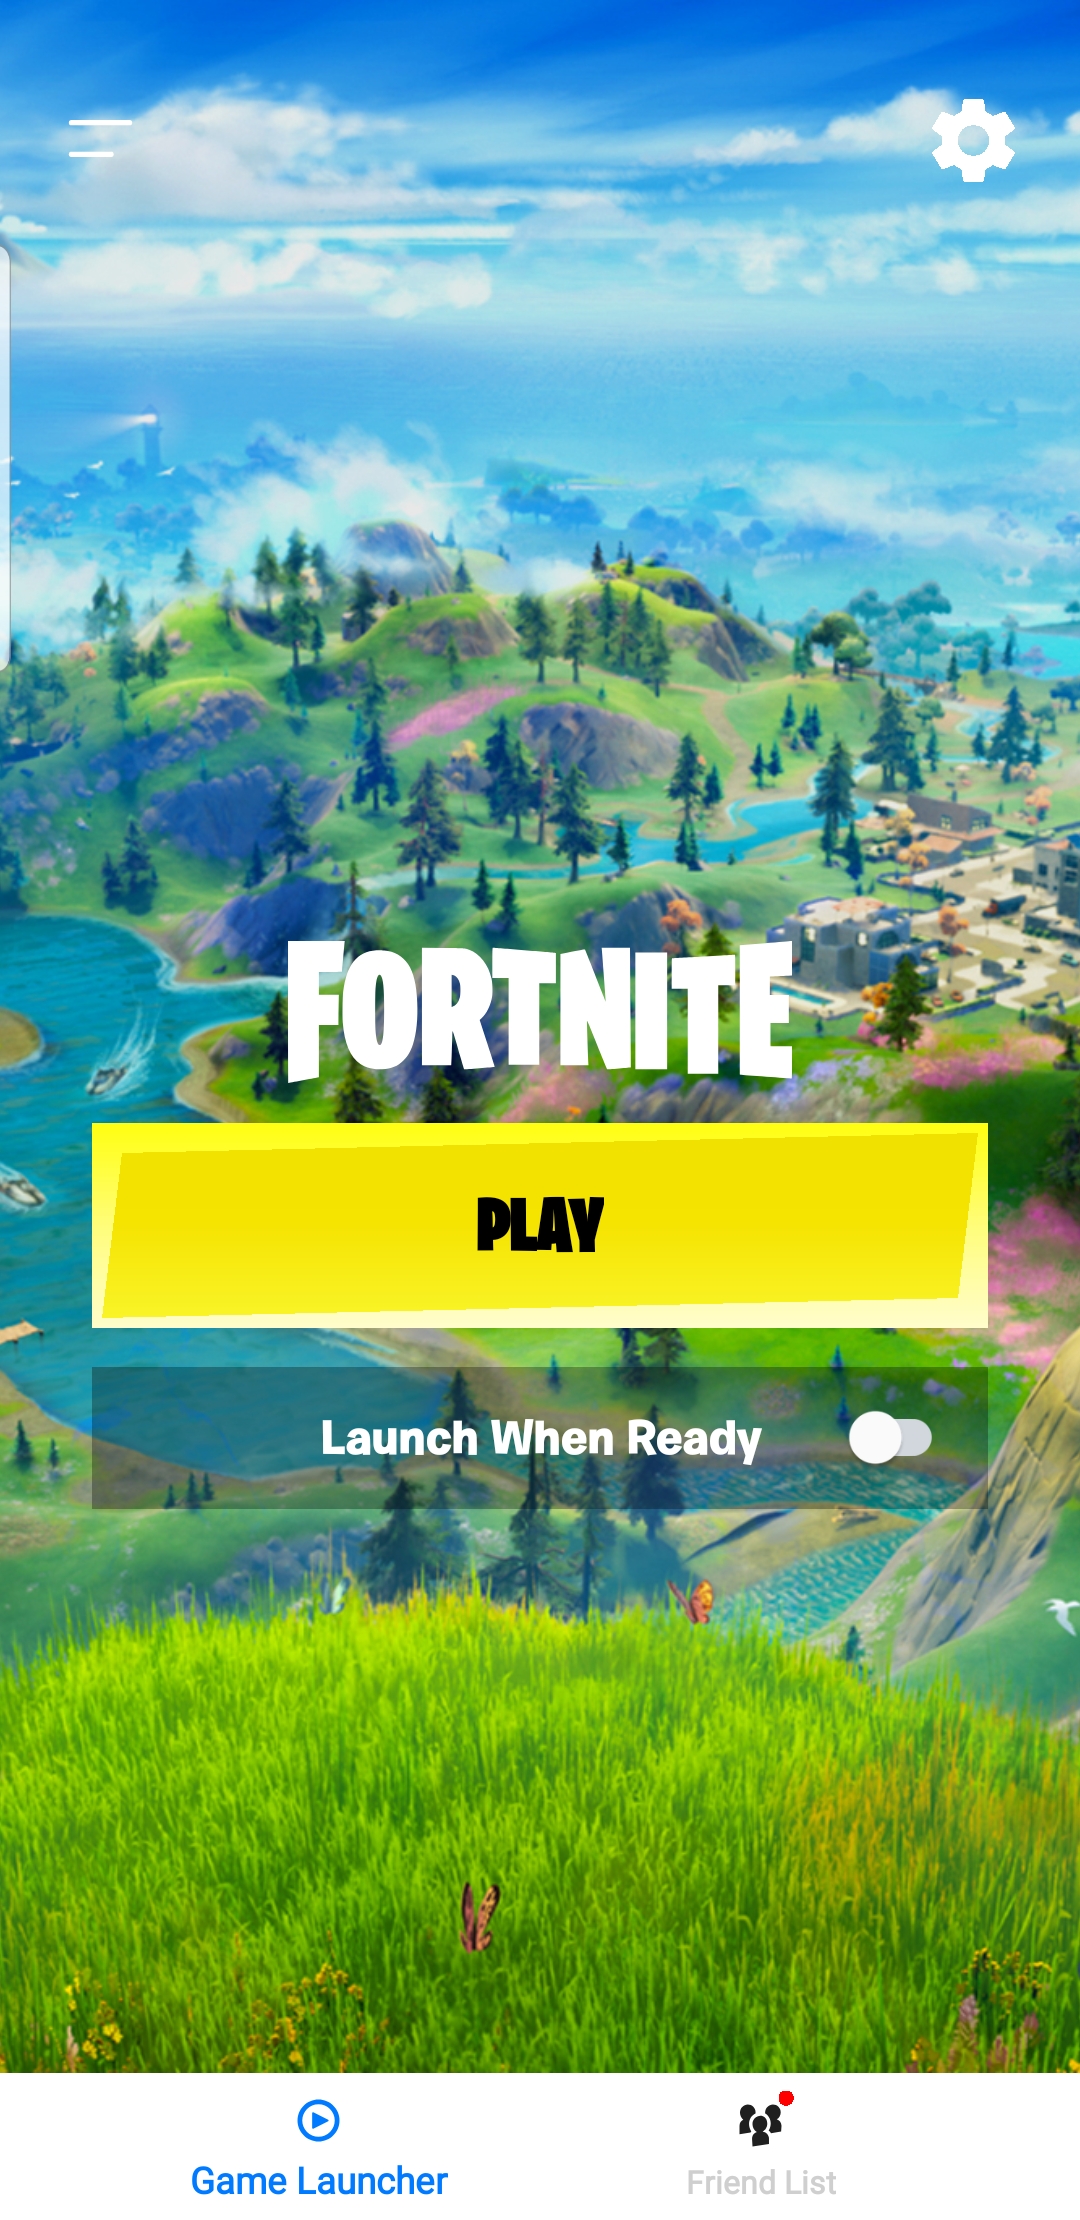 How to Update the Epic Games Launcher and Its Games